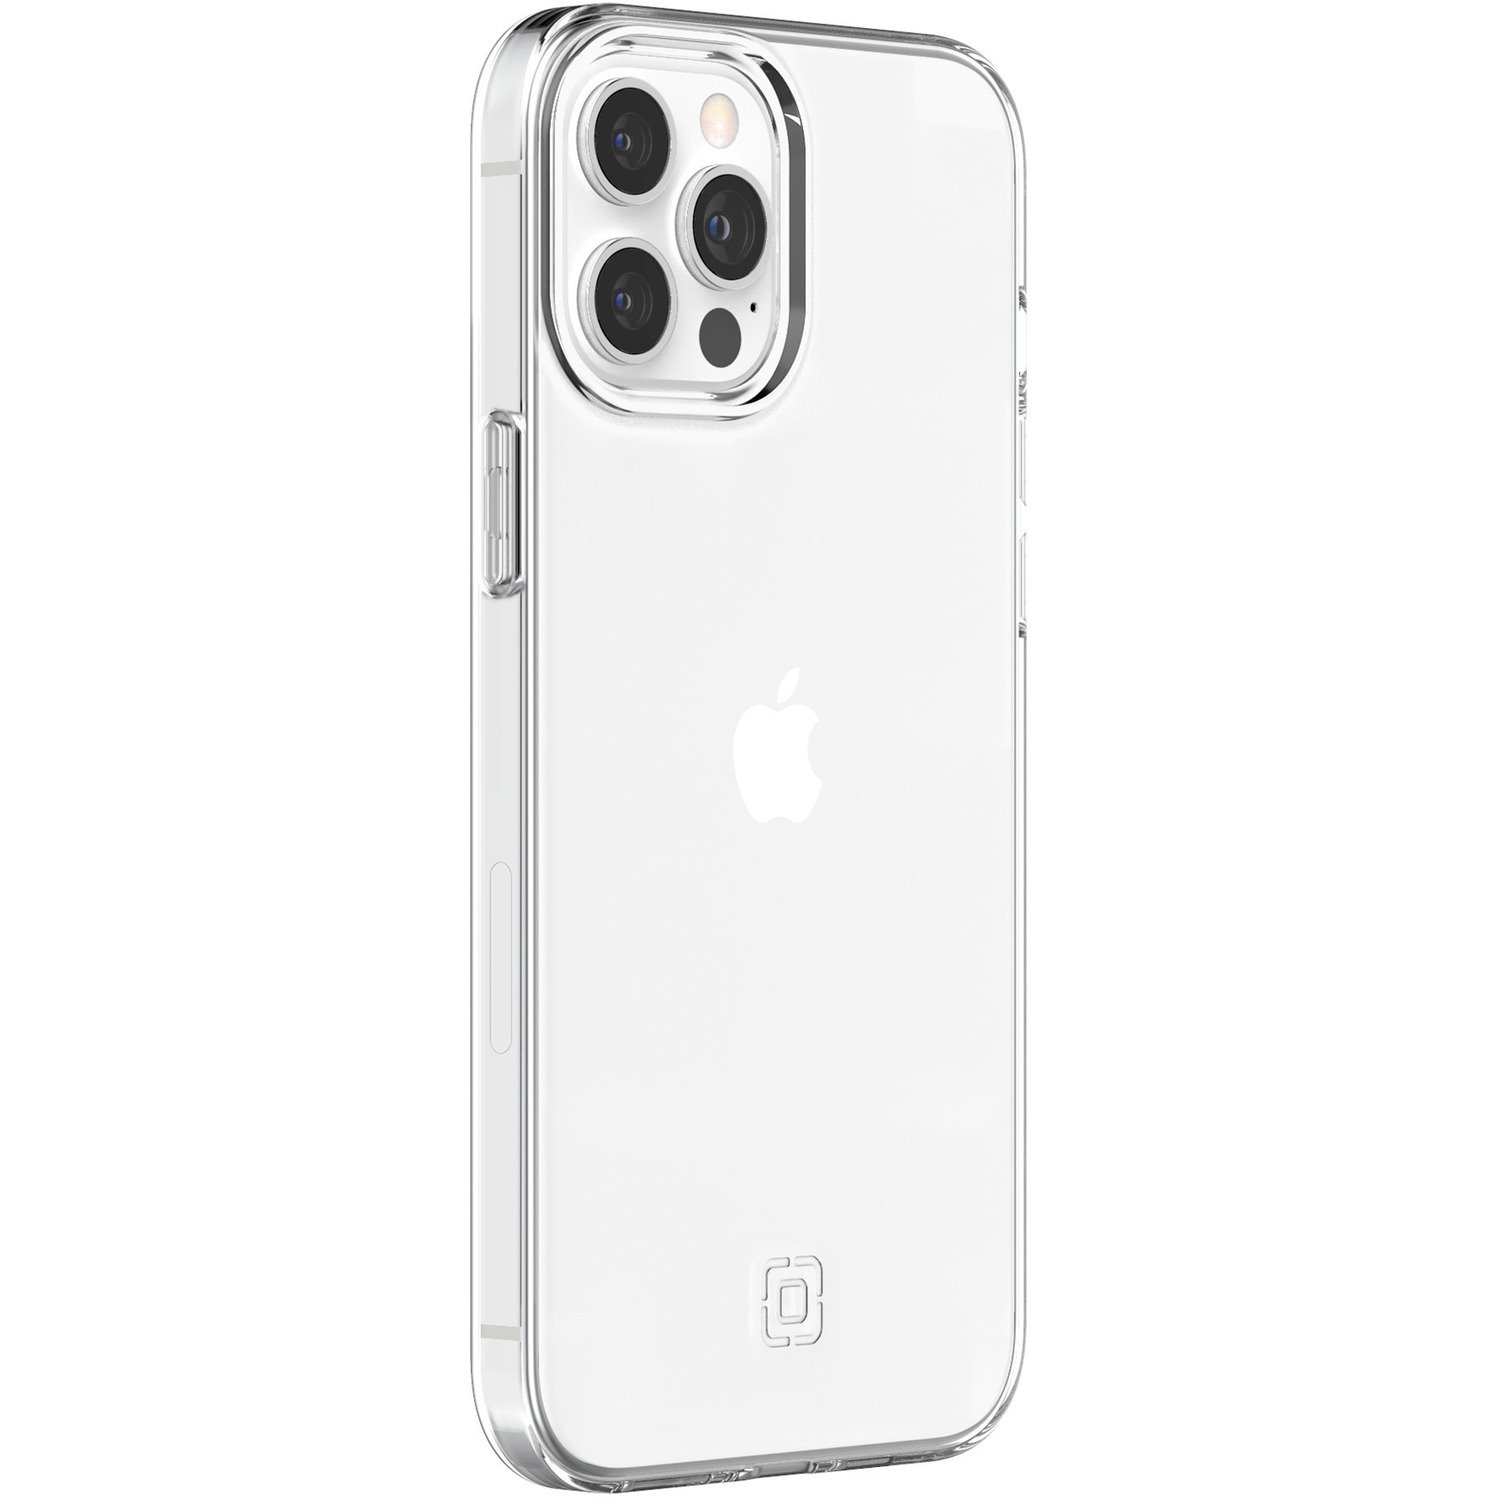 Incipio NGP Pure Case for Apple iPhone 12 Pro Max Smartphone - Clear